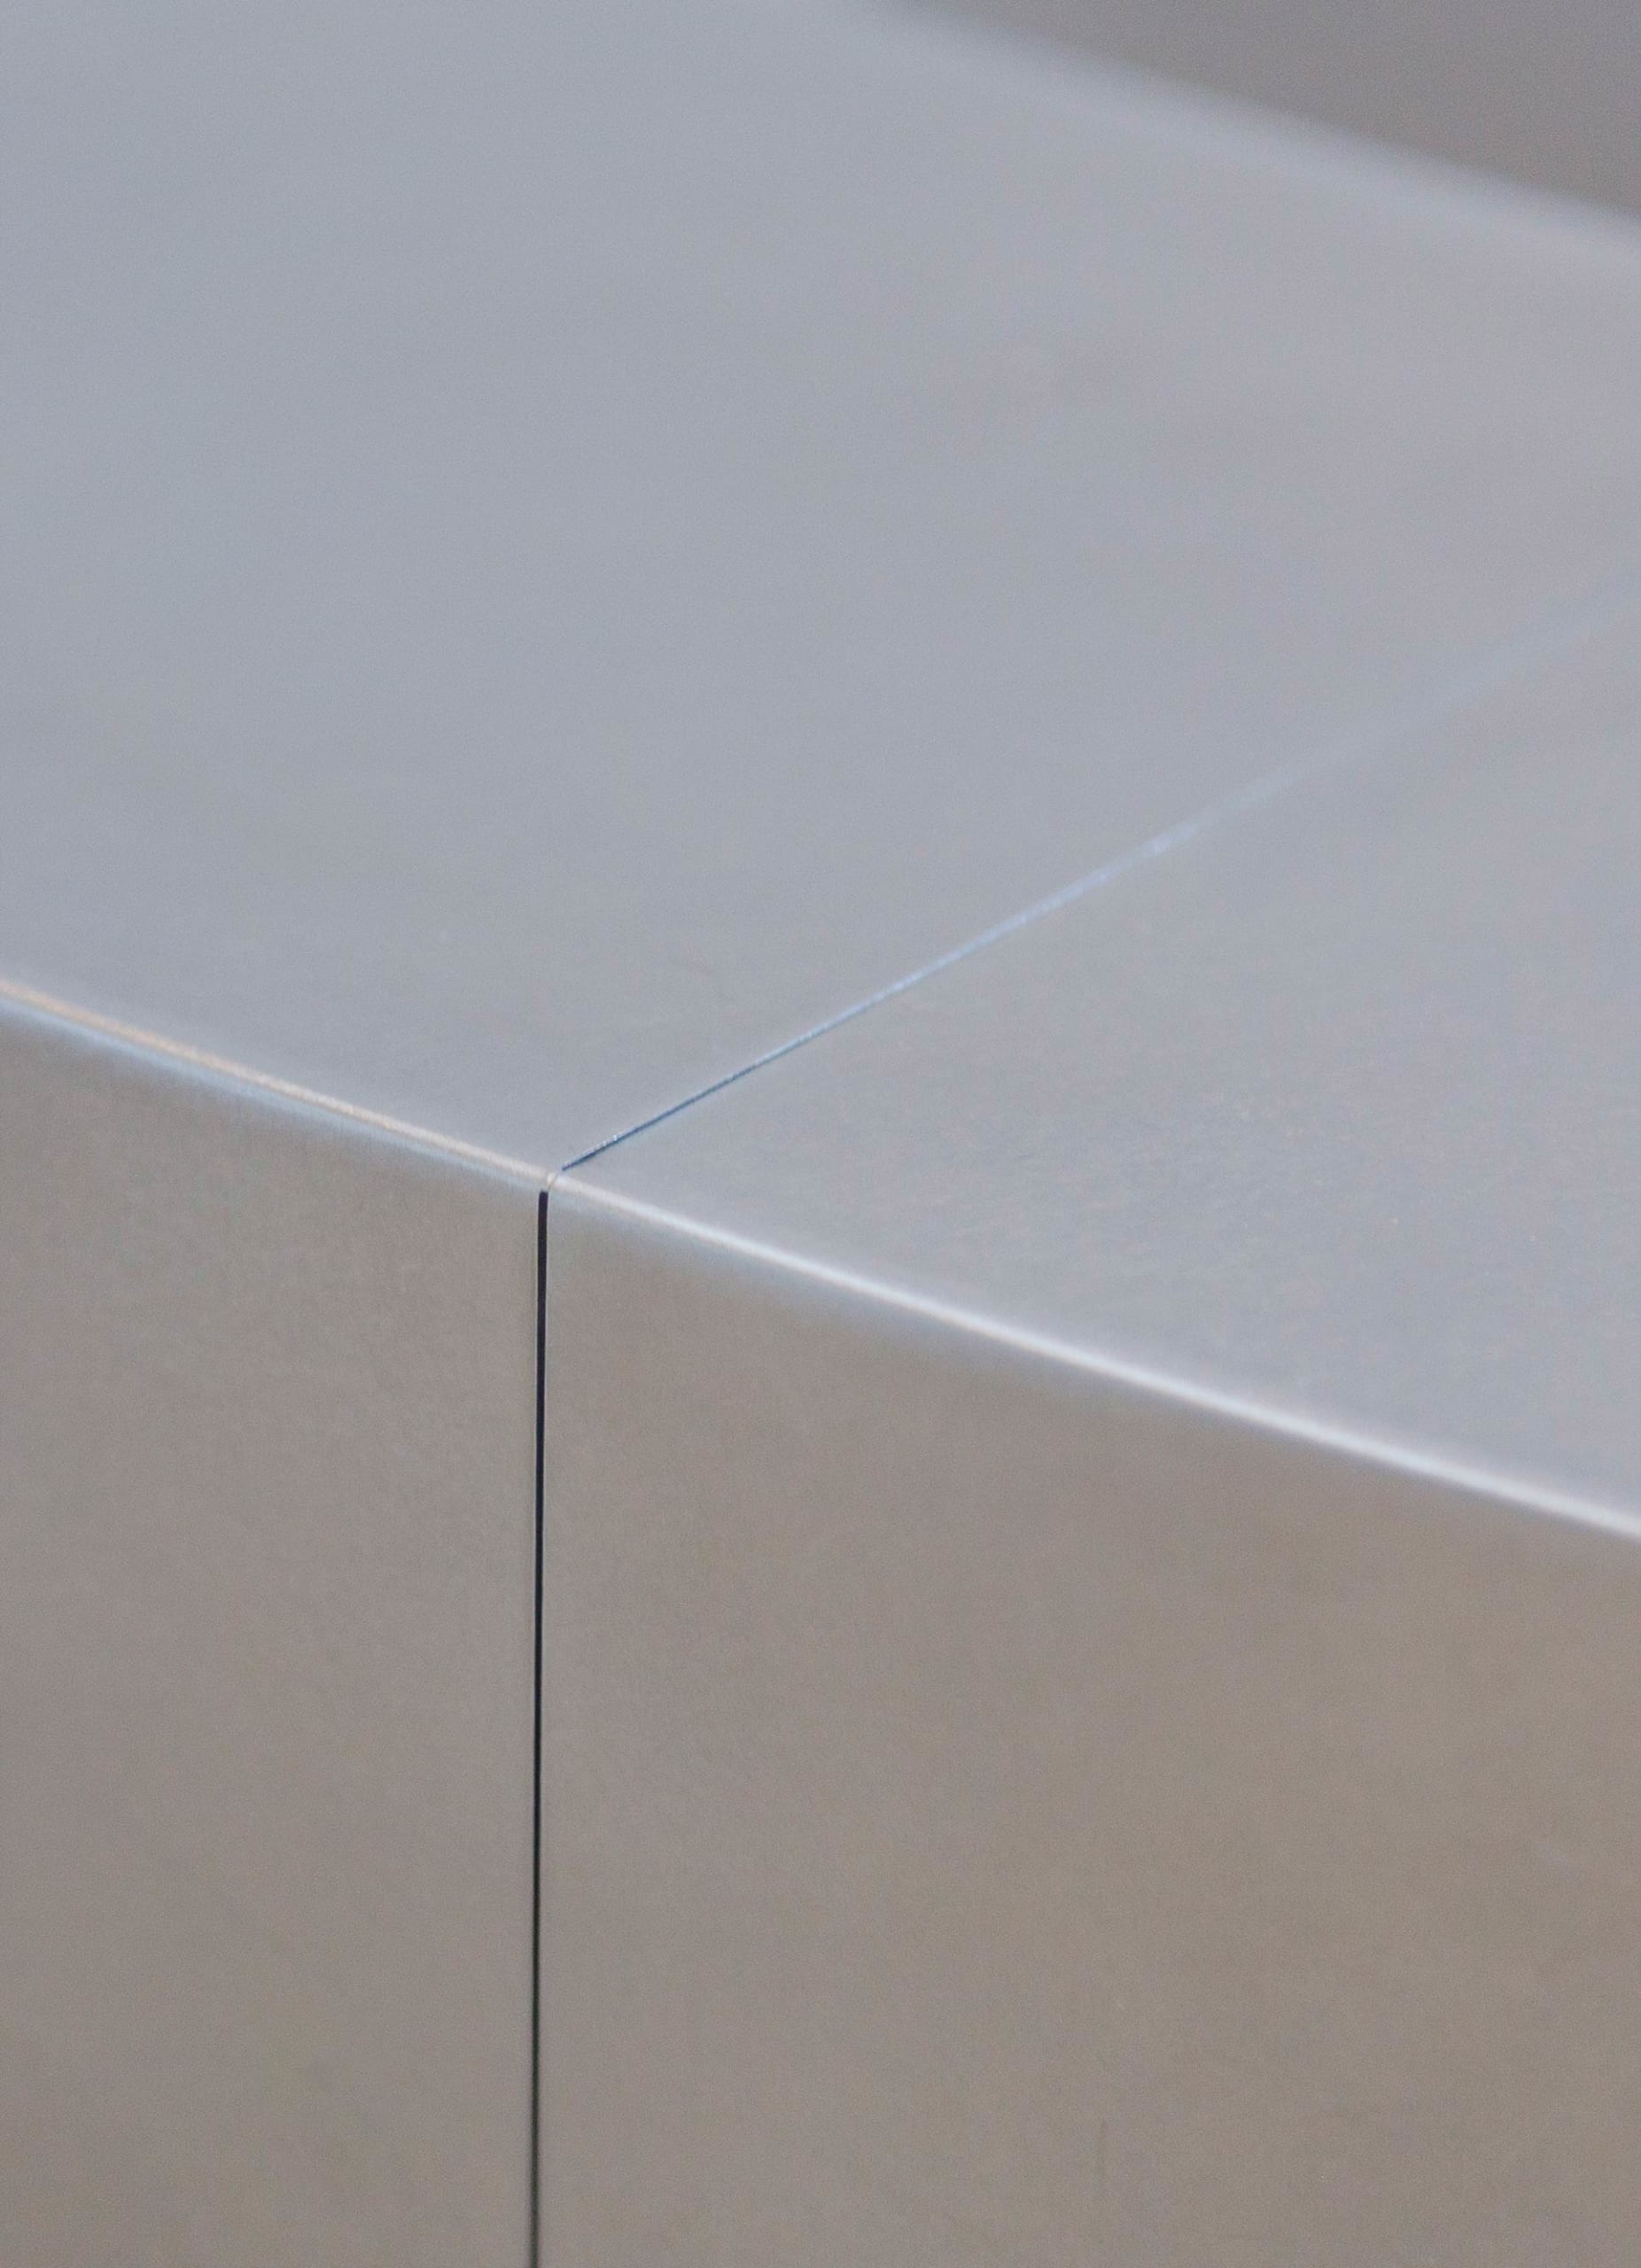 Detail of the stainless steel reception desk for the Nerman Museum of Contemporary Art